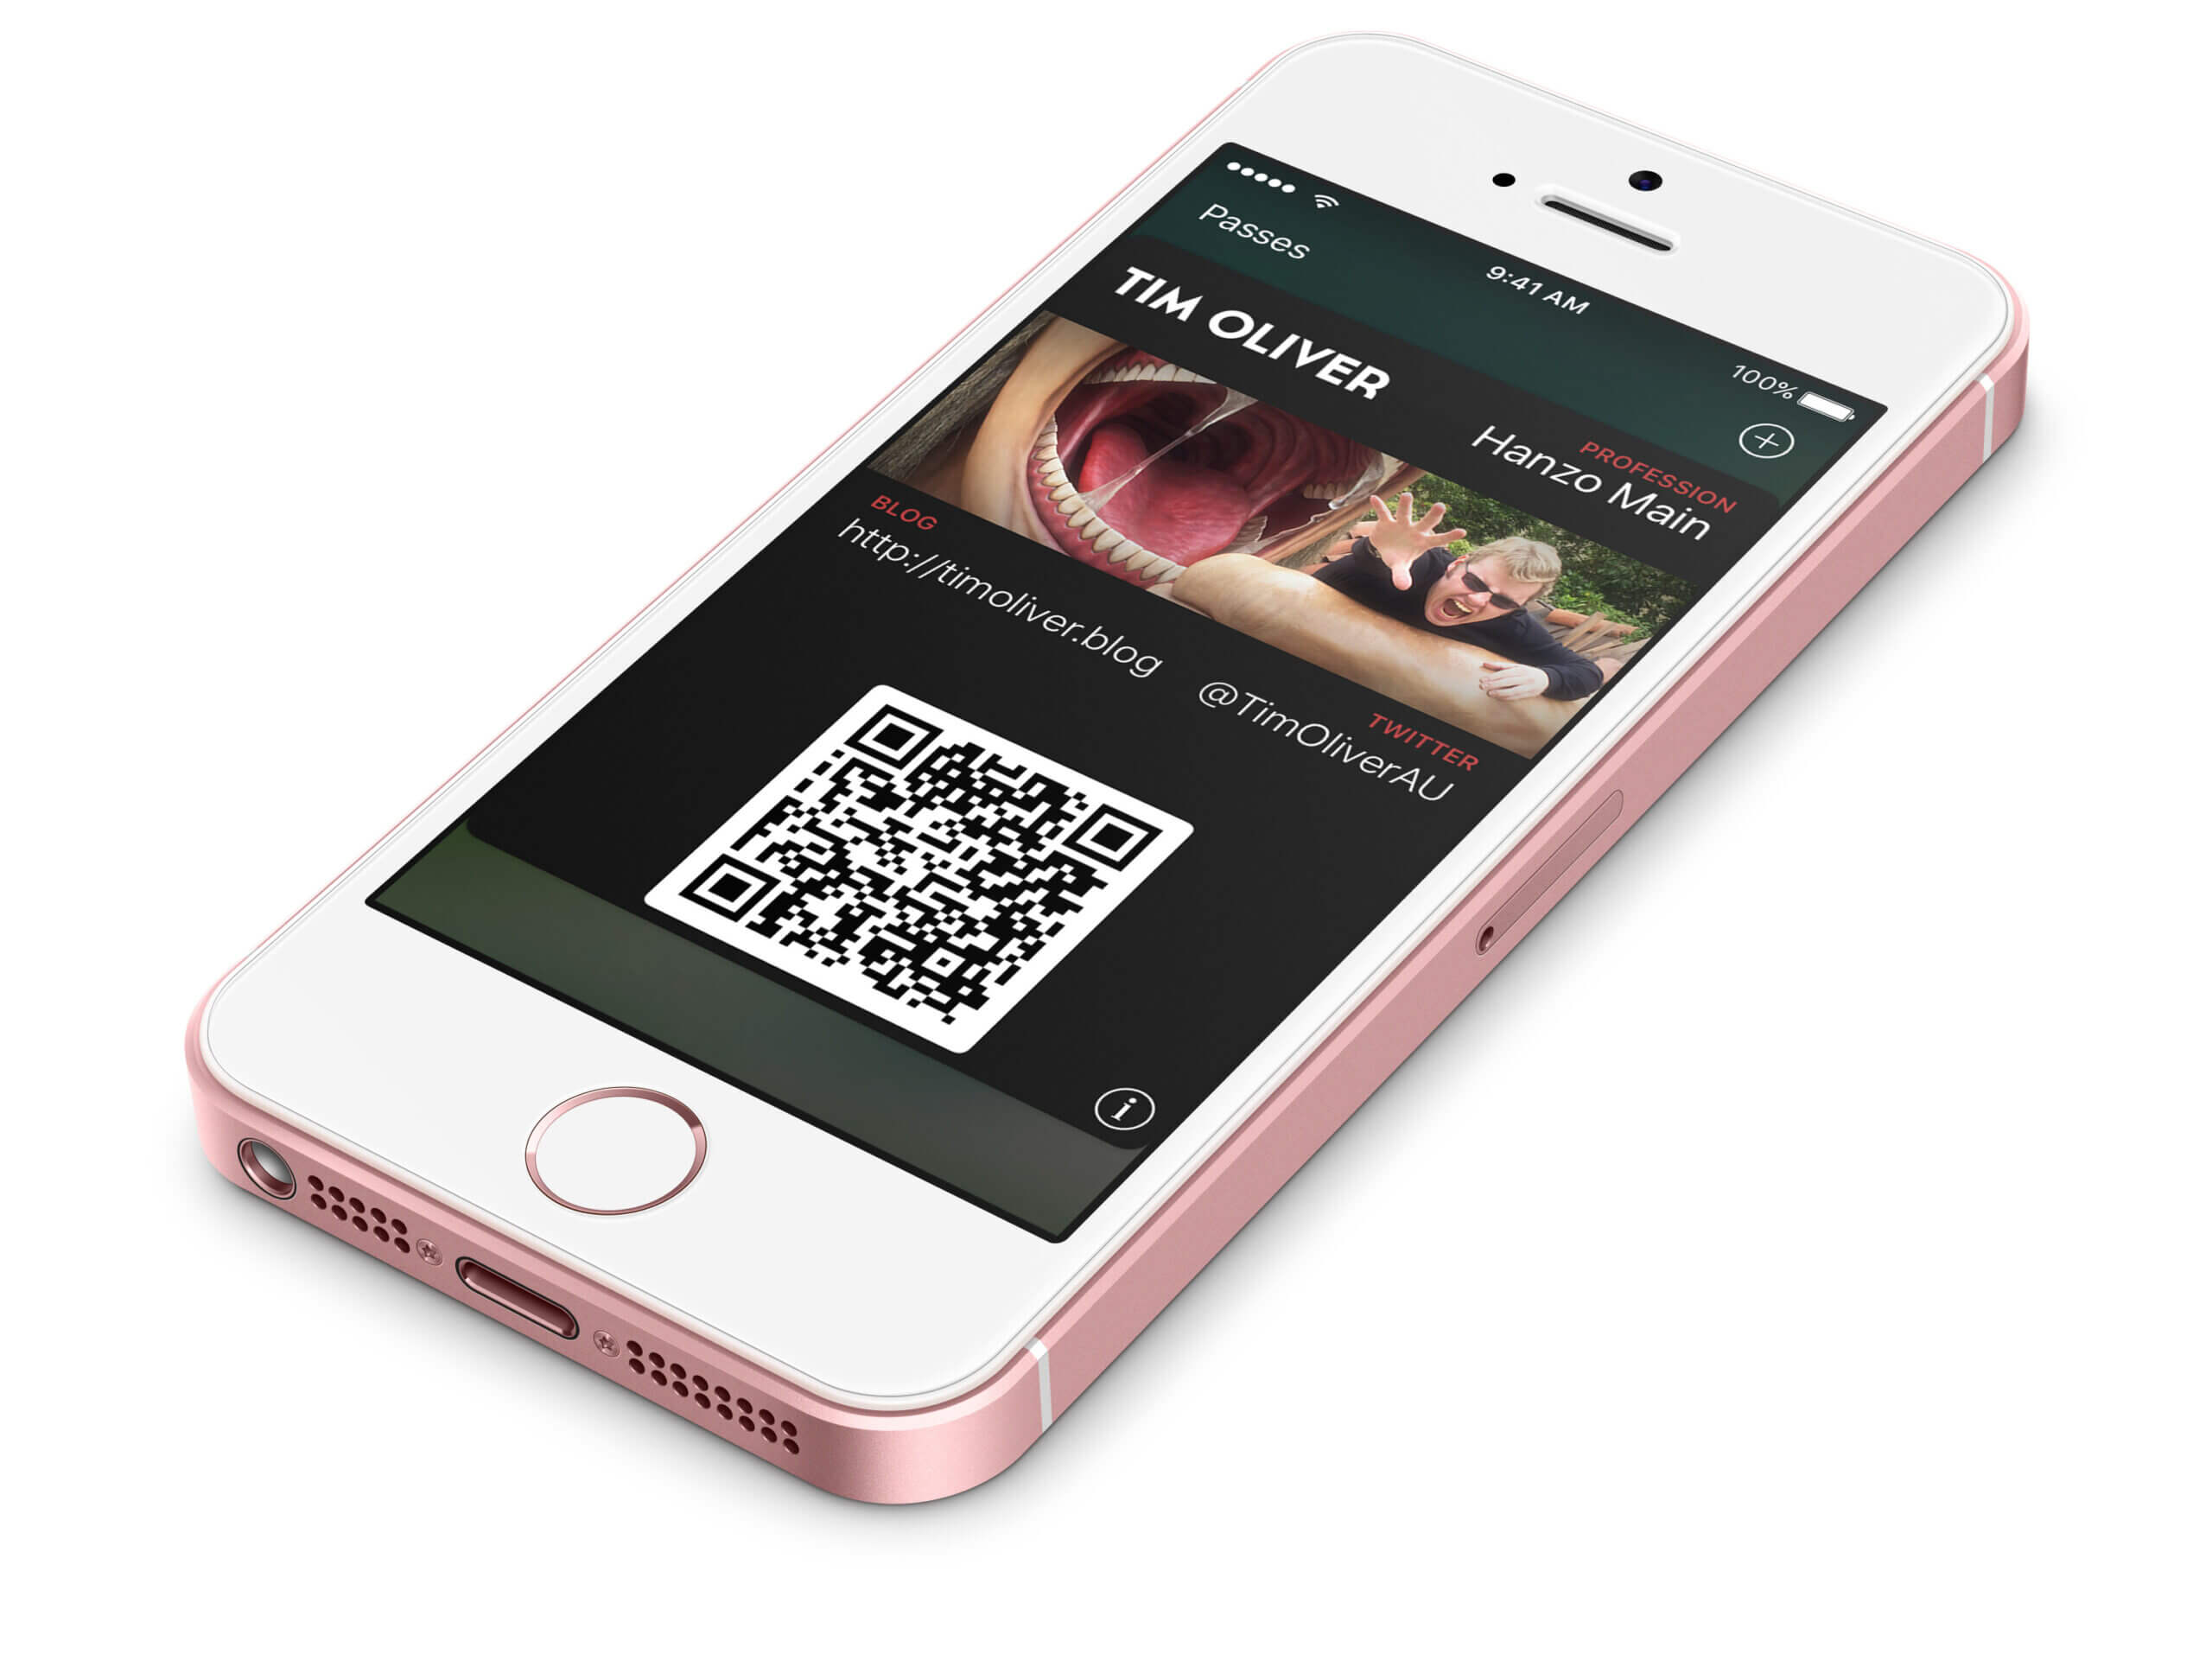 Passkit Business Card/readme.md At Master · Timoliver Regarding Iphone Business Card Template